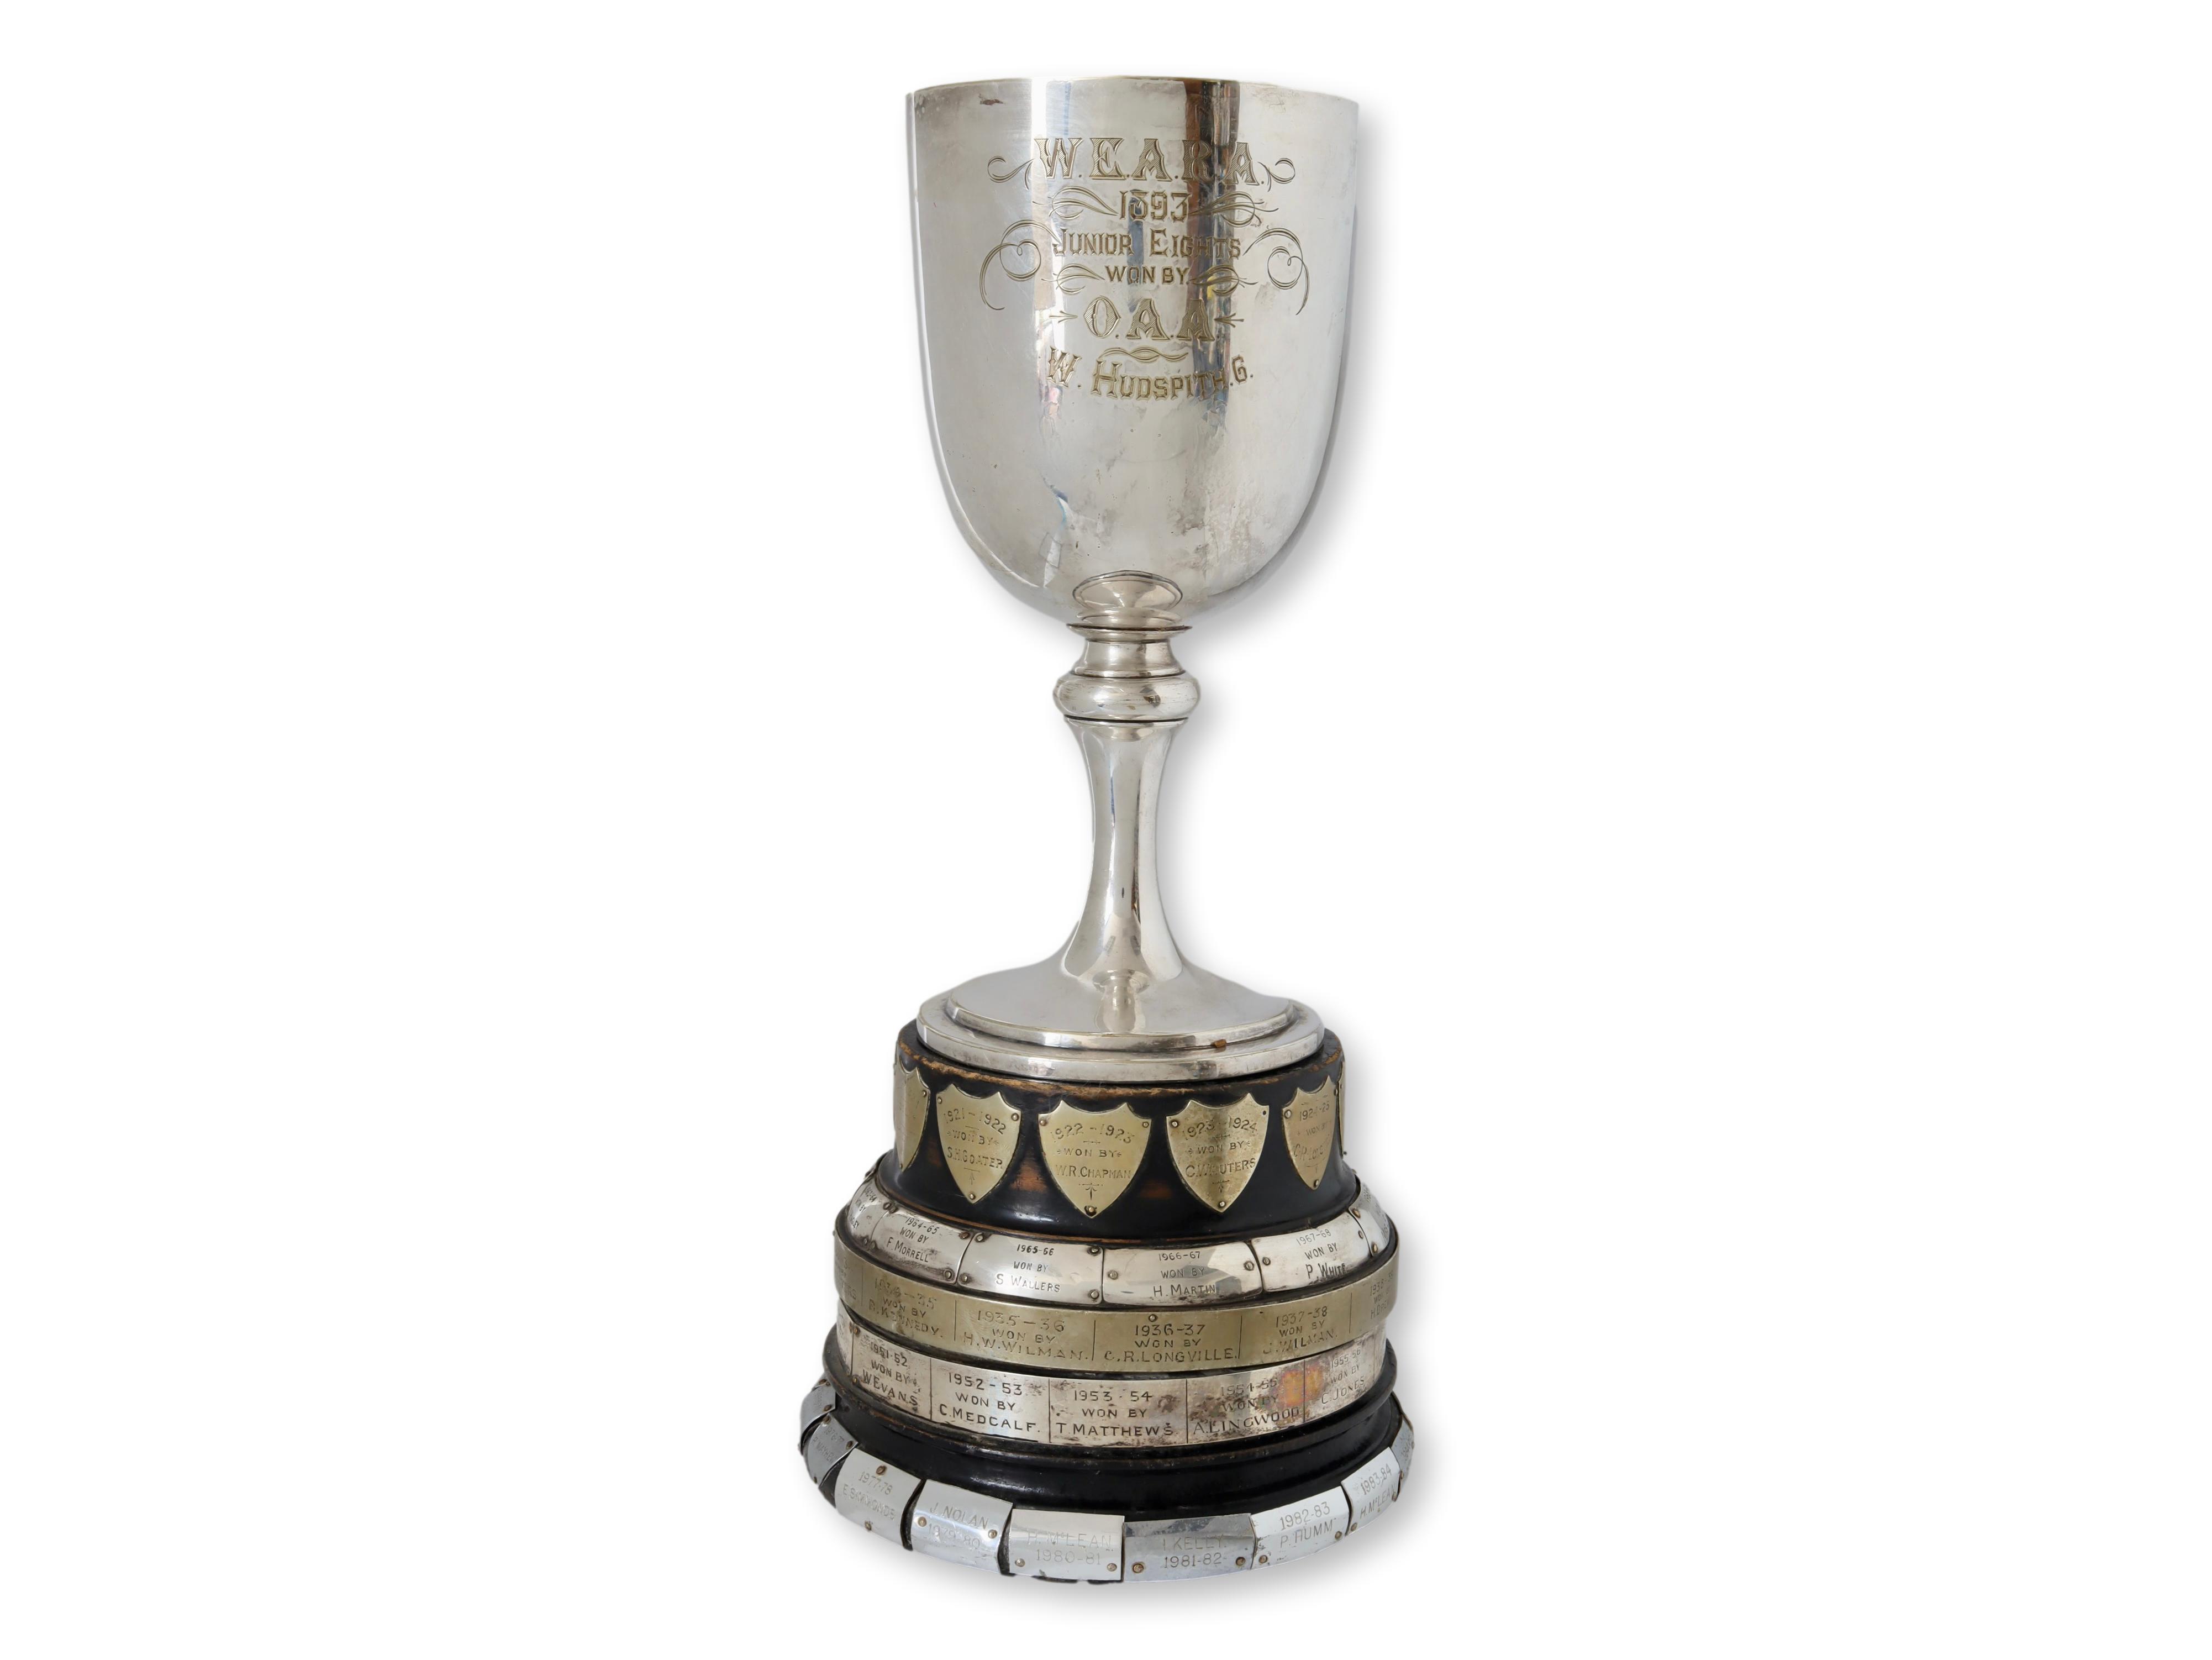 Large 1893 Junior Eights Rowing Trophy~P77673180